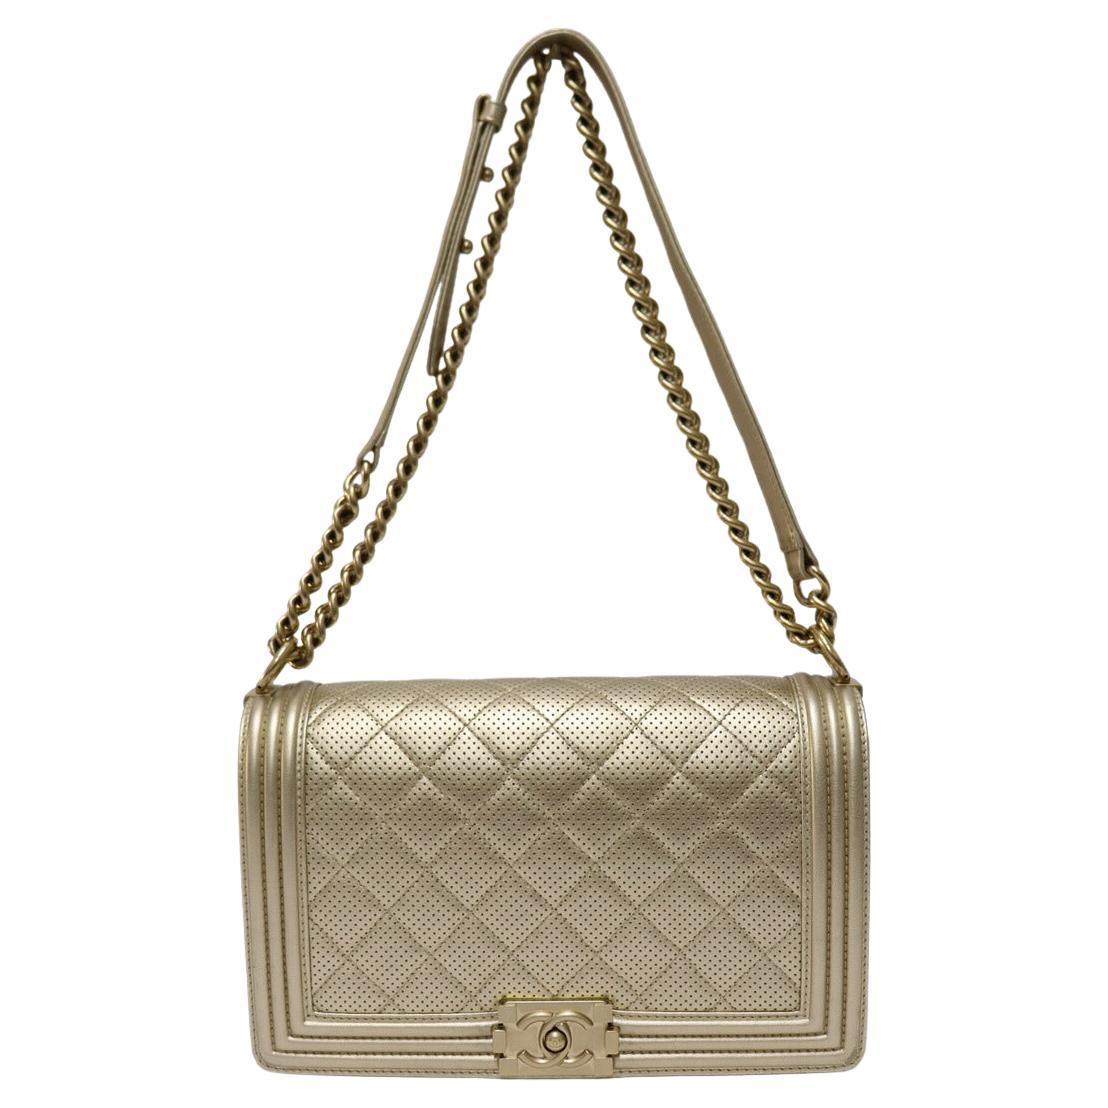 Chanel Light Gold Perforated Leather New Medium Boy Bag